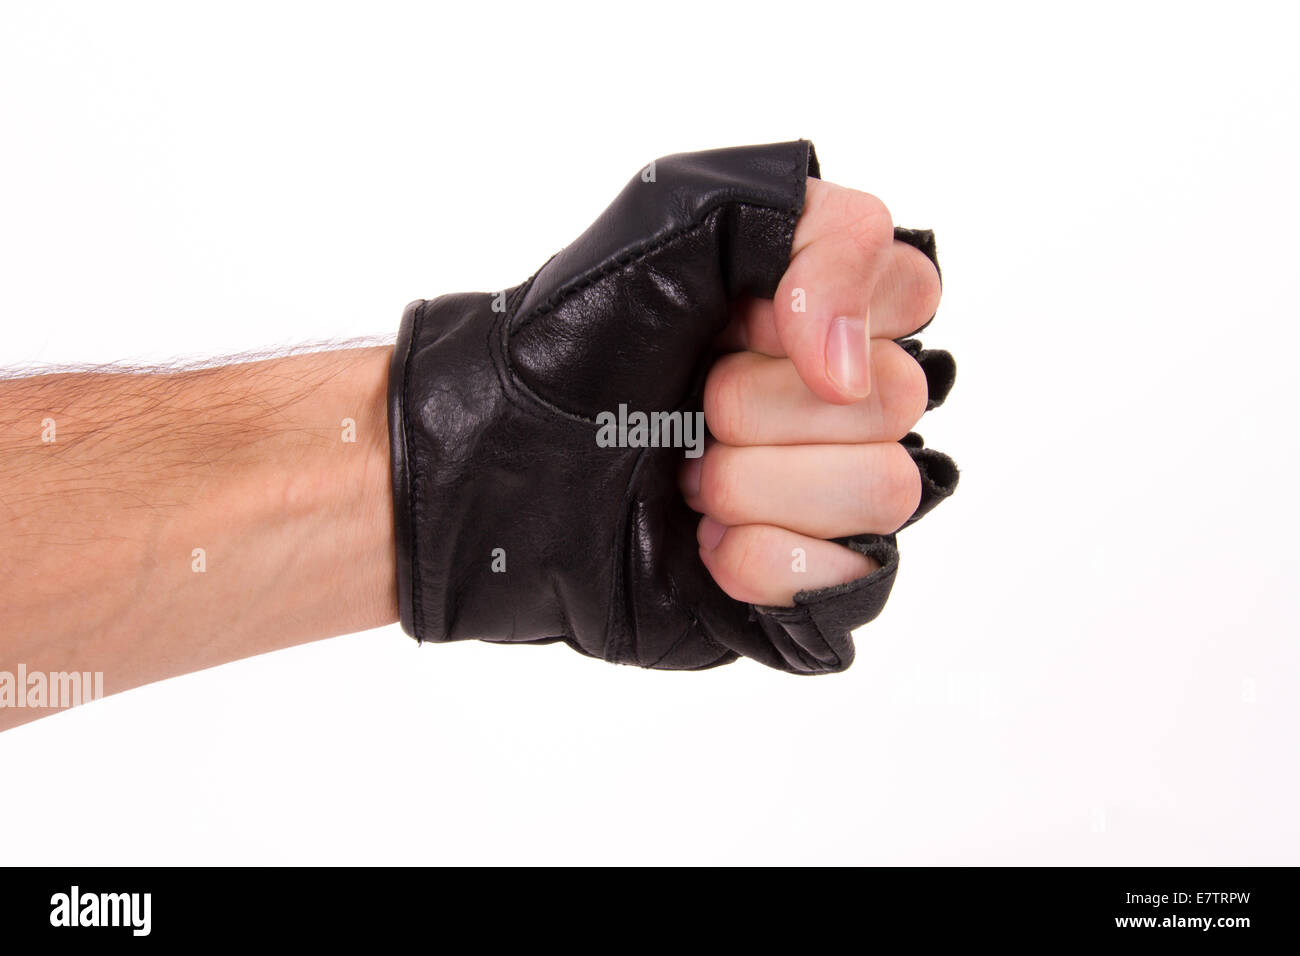 Fist, punch coming out from side with sport glove, isolated on white background. Stock Photo